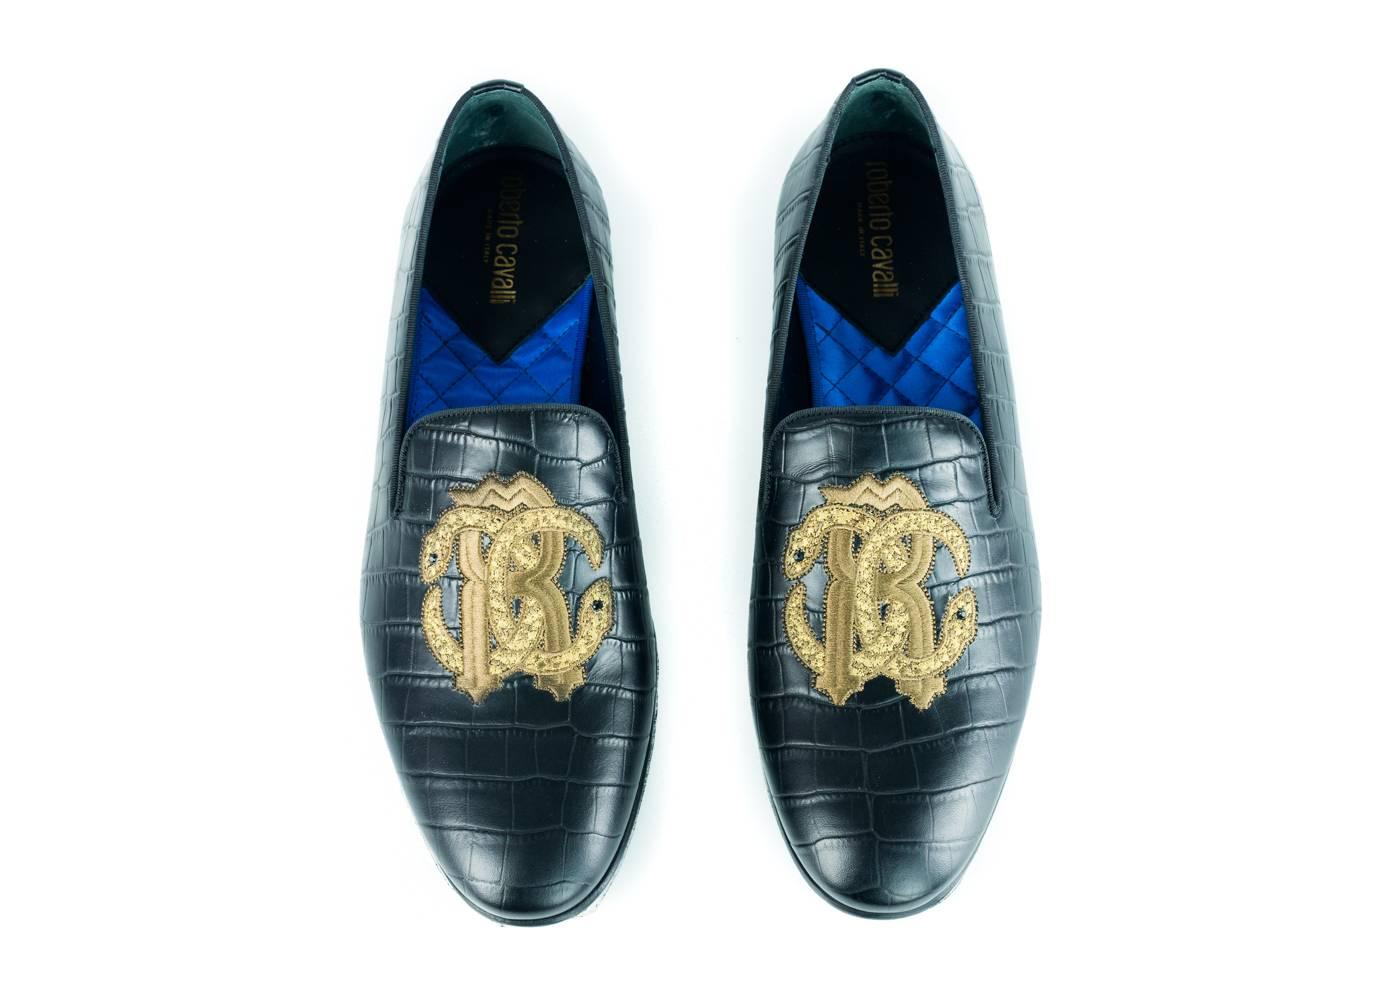 Brand New Roberto Cavalli Slip Ons
Original Box & Dust bag Included
Retails in Stores & Online for $1300
Size E39 / US 9 Fits True To Size
 
Roberto Cavalli black Leather slip ons featuring a quilted pattern throughout the shoe. The slip ons also